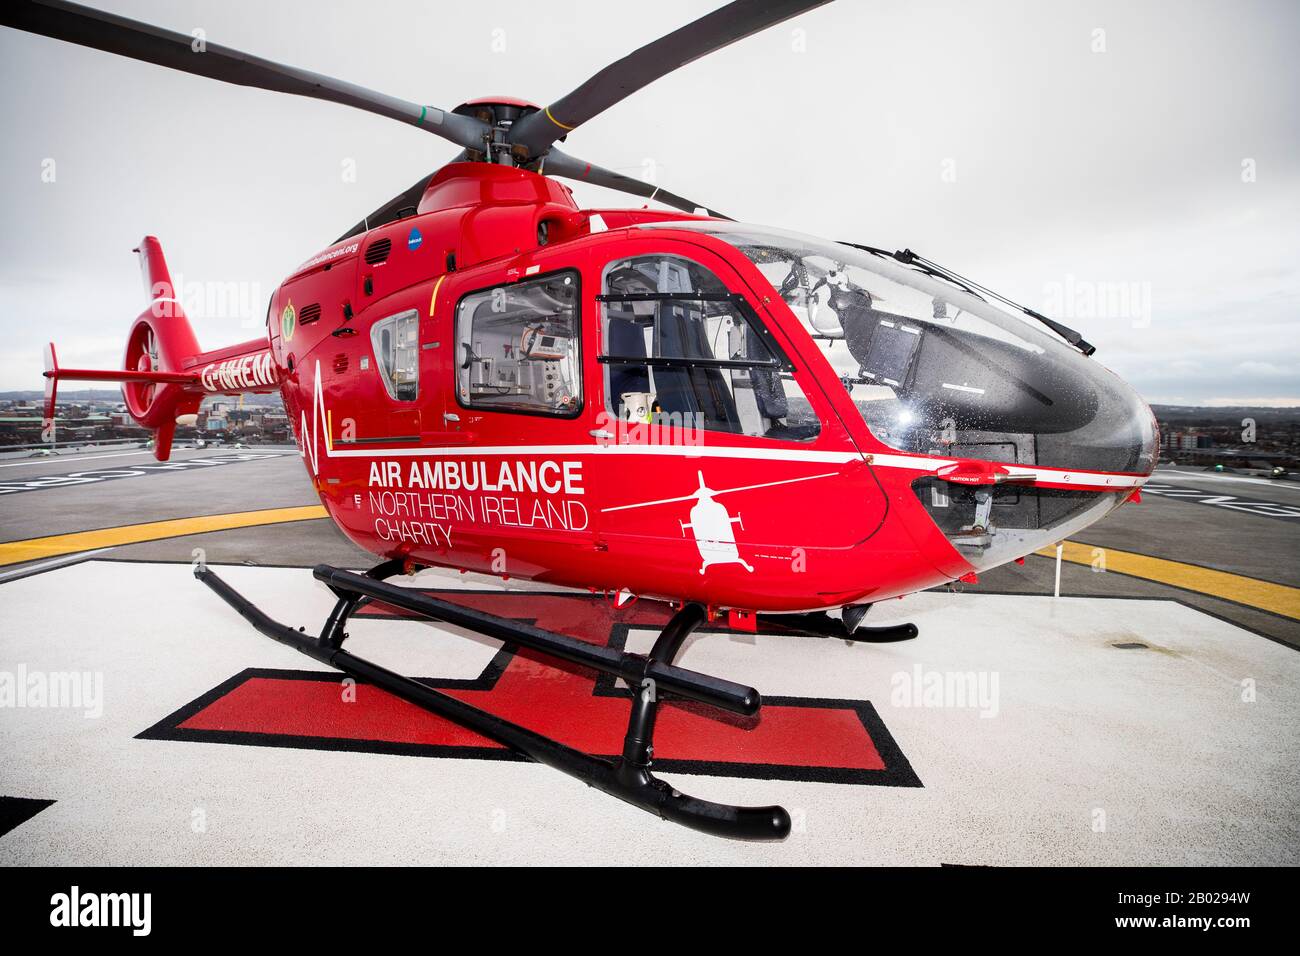 An air ambulance used by the Northern Ireland Helicopter Emergency Medical Service (HEMS) on the helipad at the Royal Victoria Hospital in West Belfast, where the first test landing of an air ambulance took place on Tuesday. Stock Photo